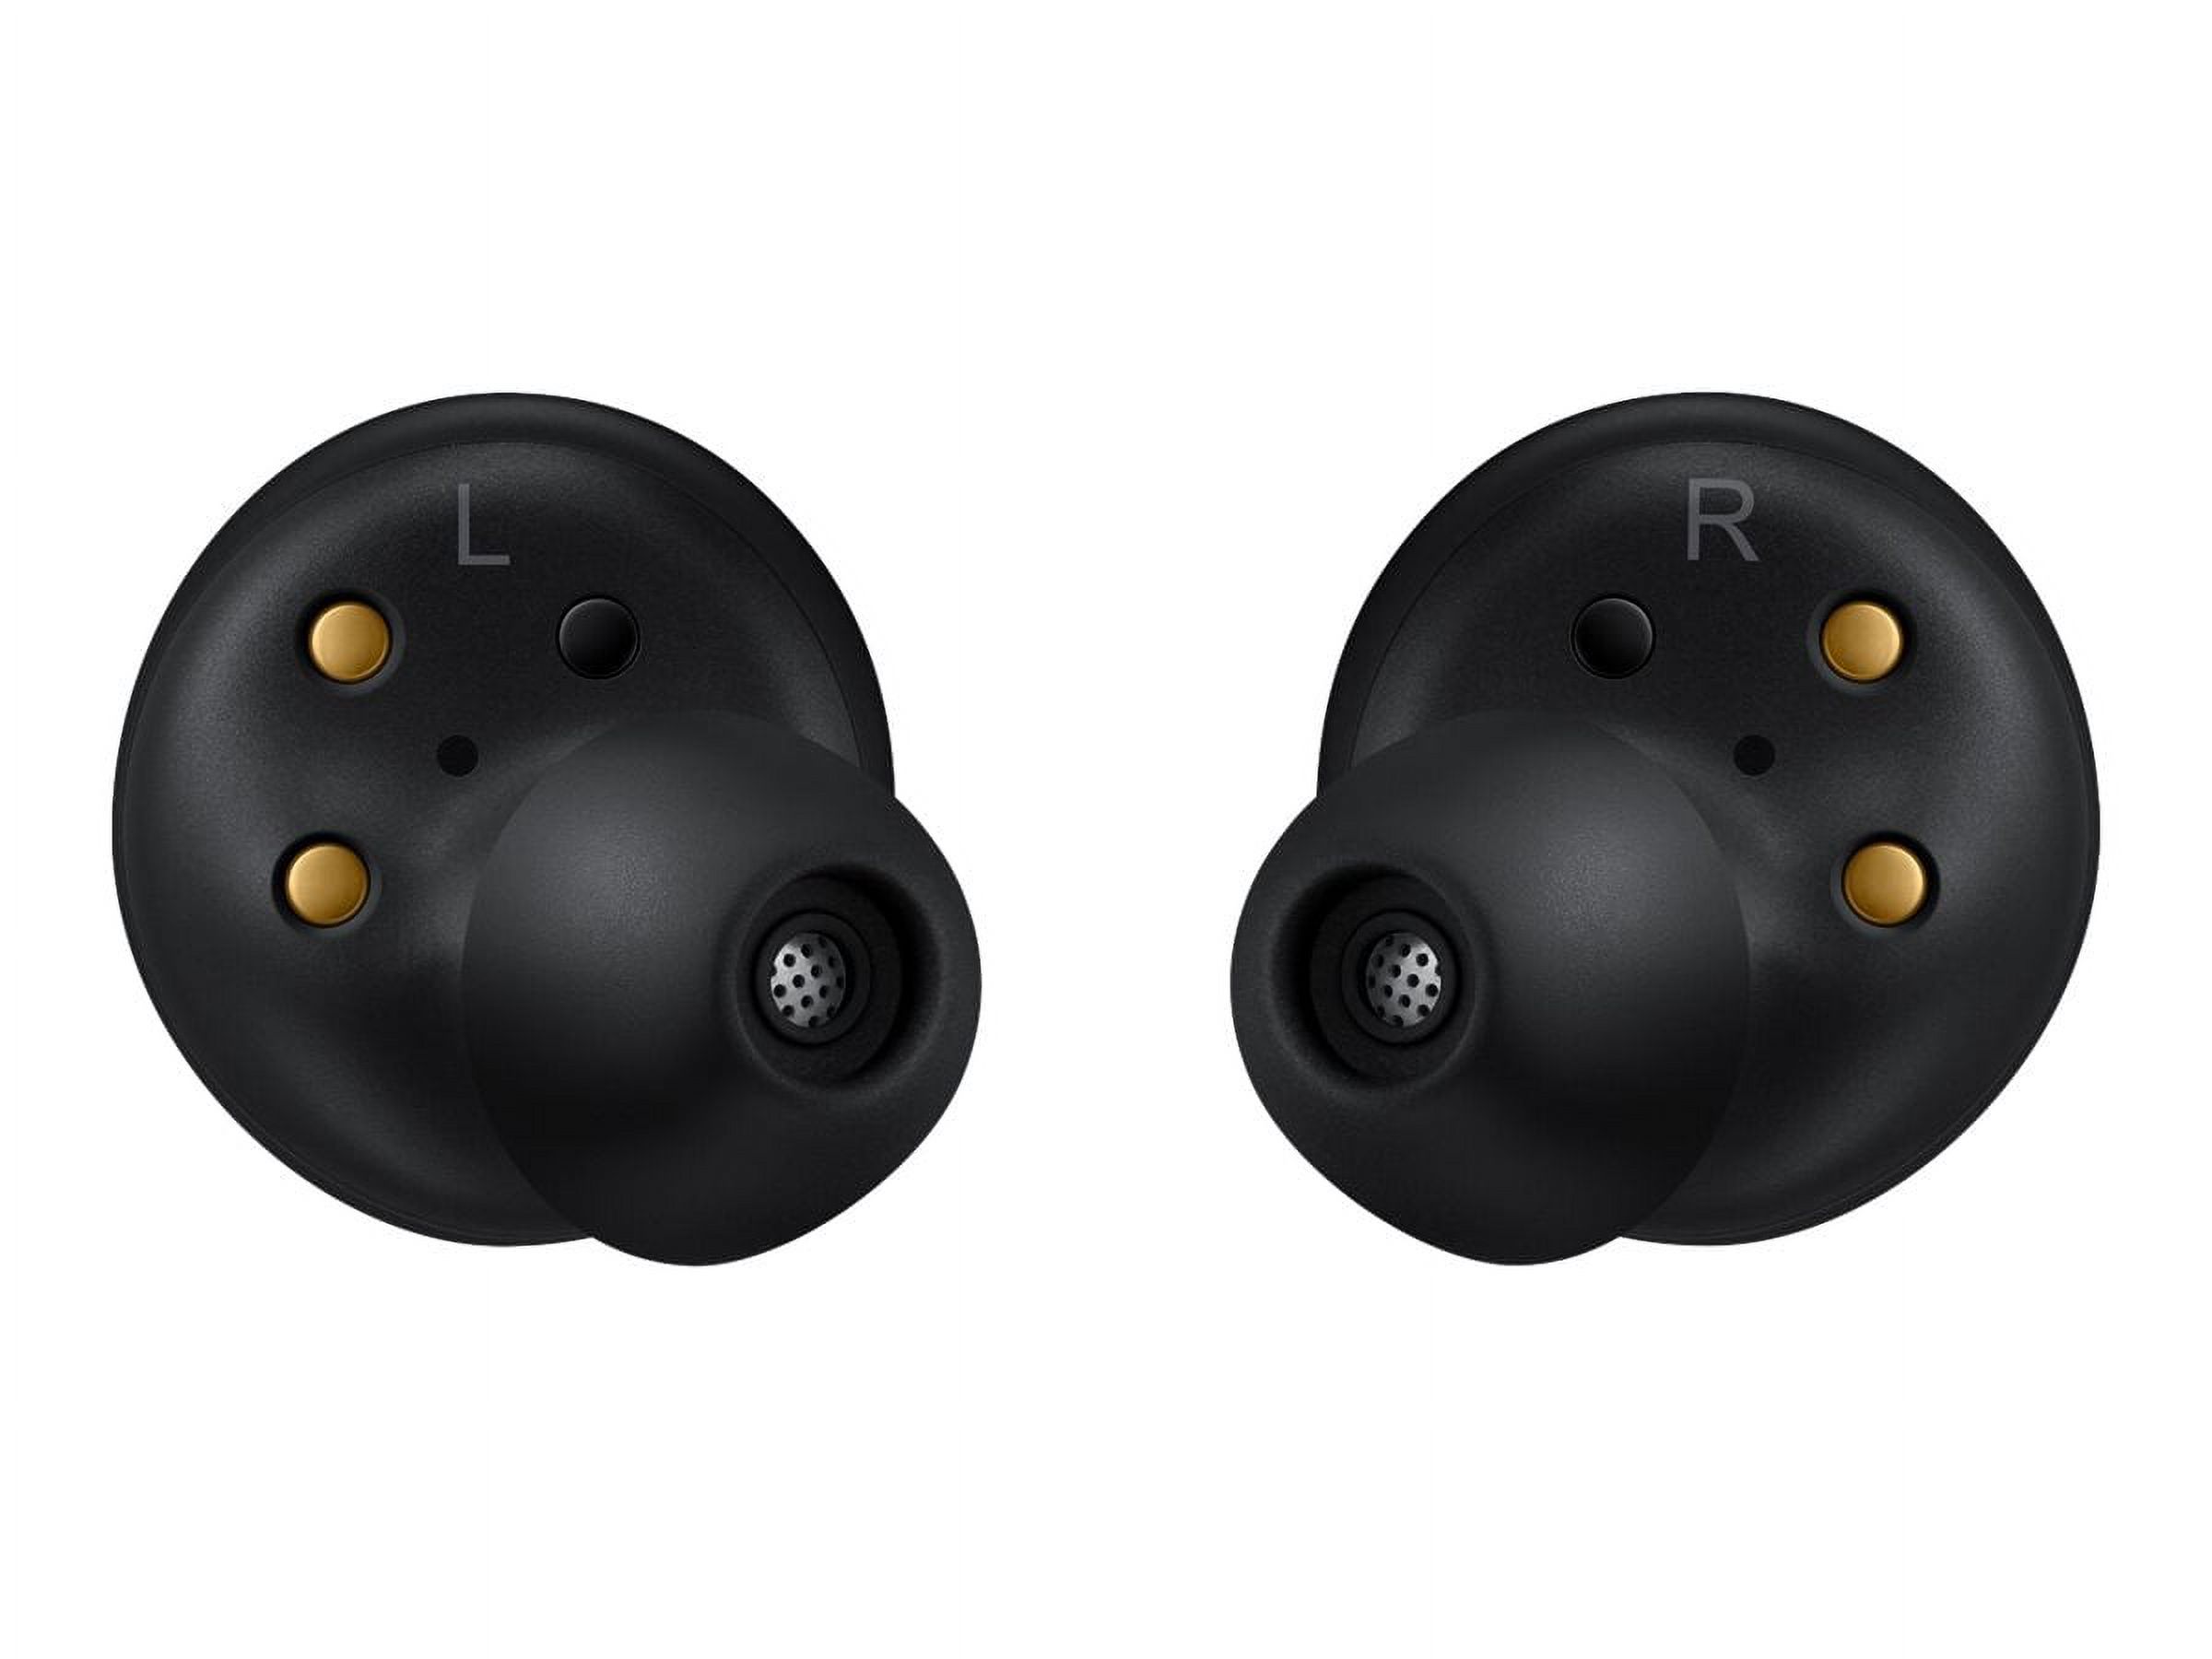 SAMSUNG Galaxy Buds, Black (Charging Case Included) - image 5 of 10